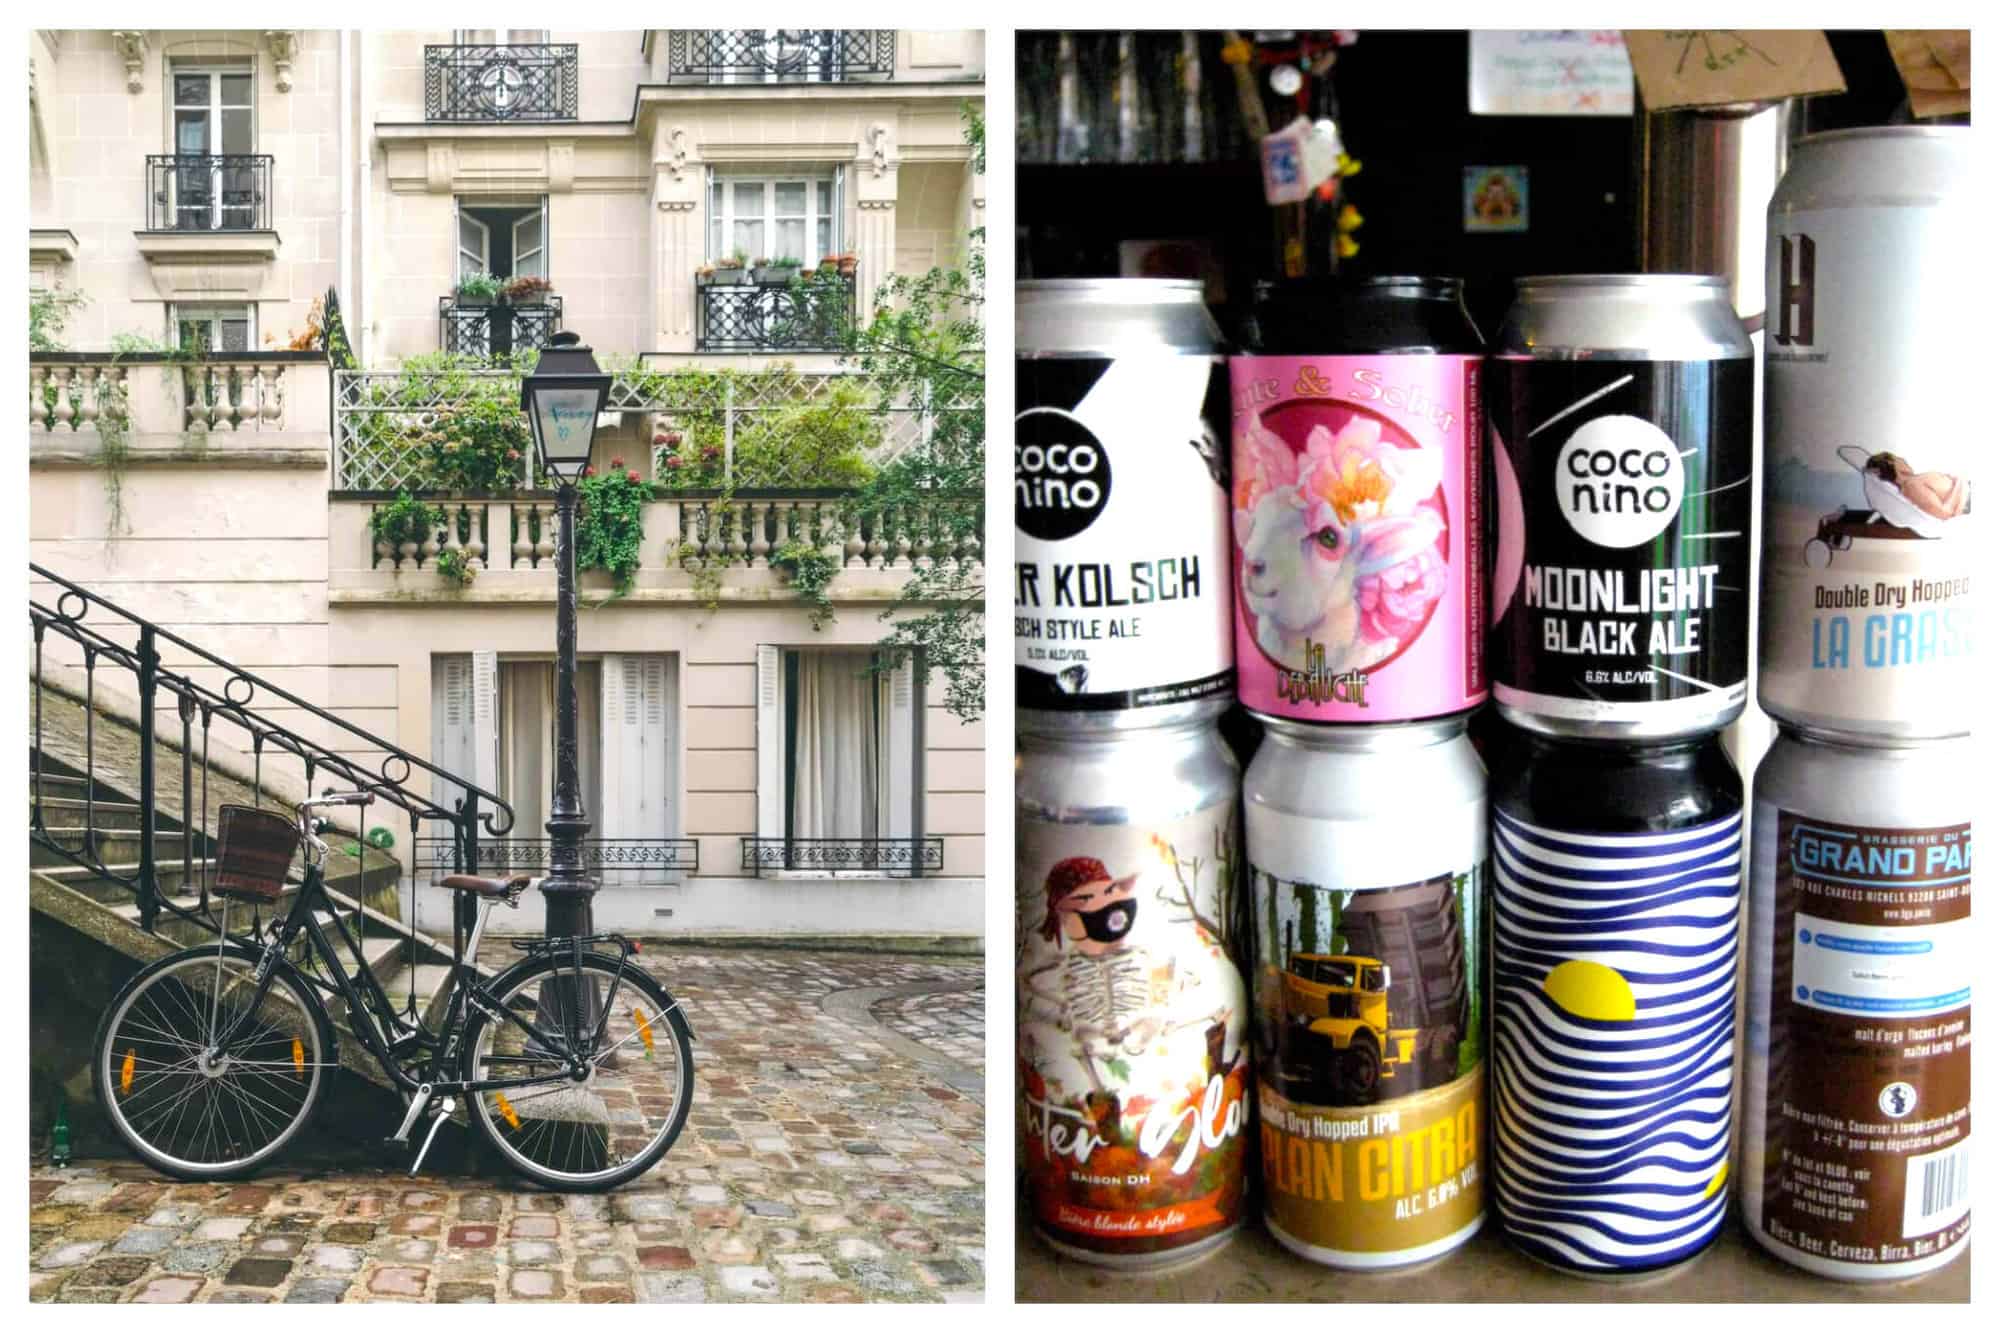 Left: a bike leaning against stairs outside in Paris. There are cobblestones visible as well as a Parisian apartment building with a large balcony filled with greenery. Right: a stack of 8 different cans of beer. The beer is artisanal. There are several labels, one that is visible reads "Coco Nino Moonlight Black Ale."